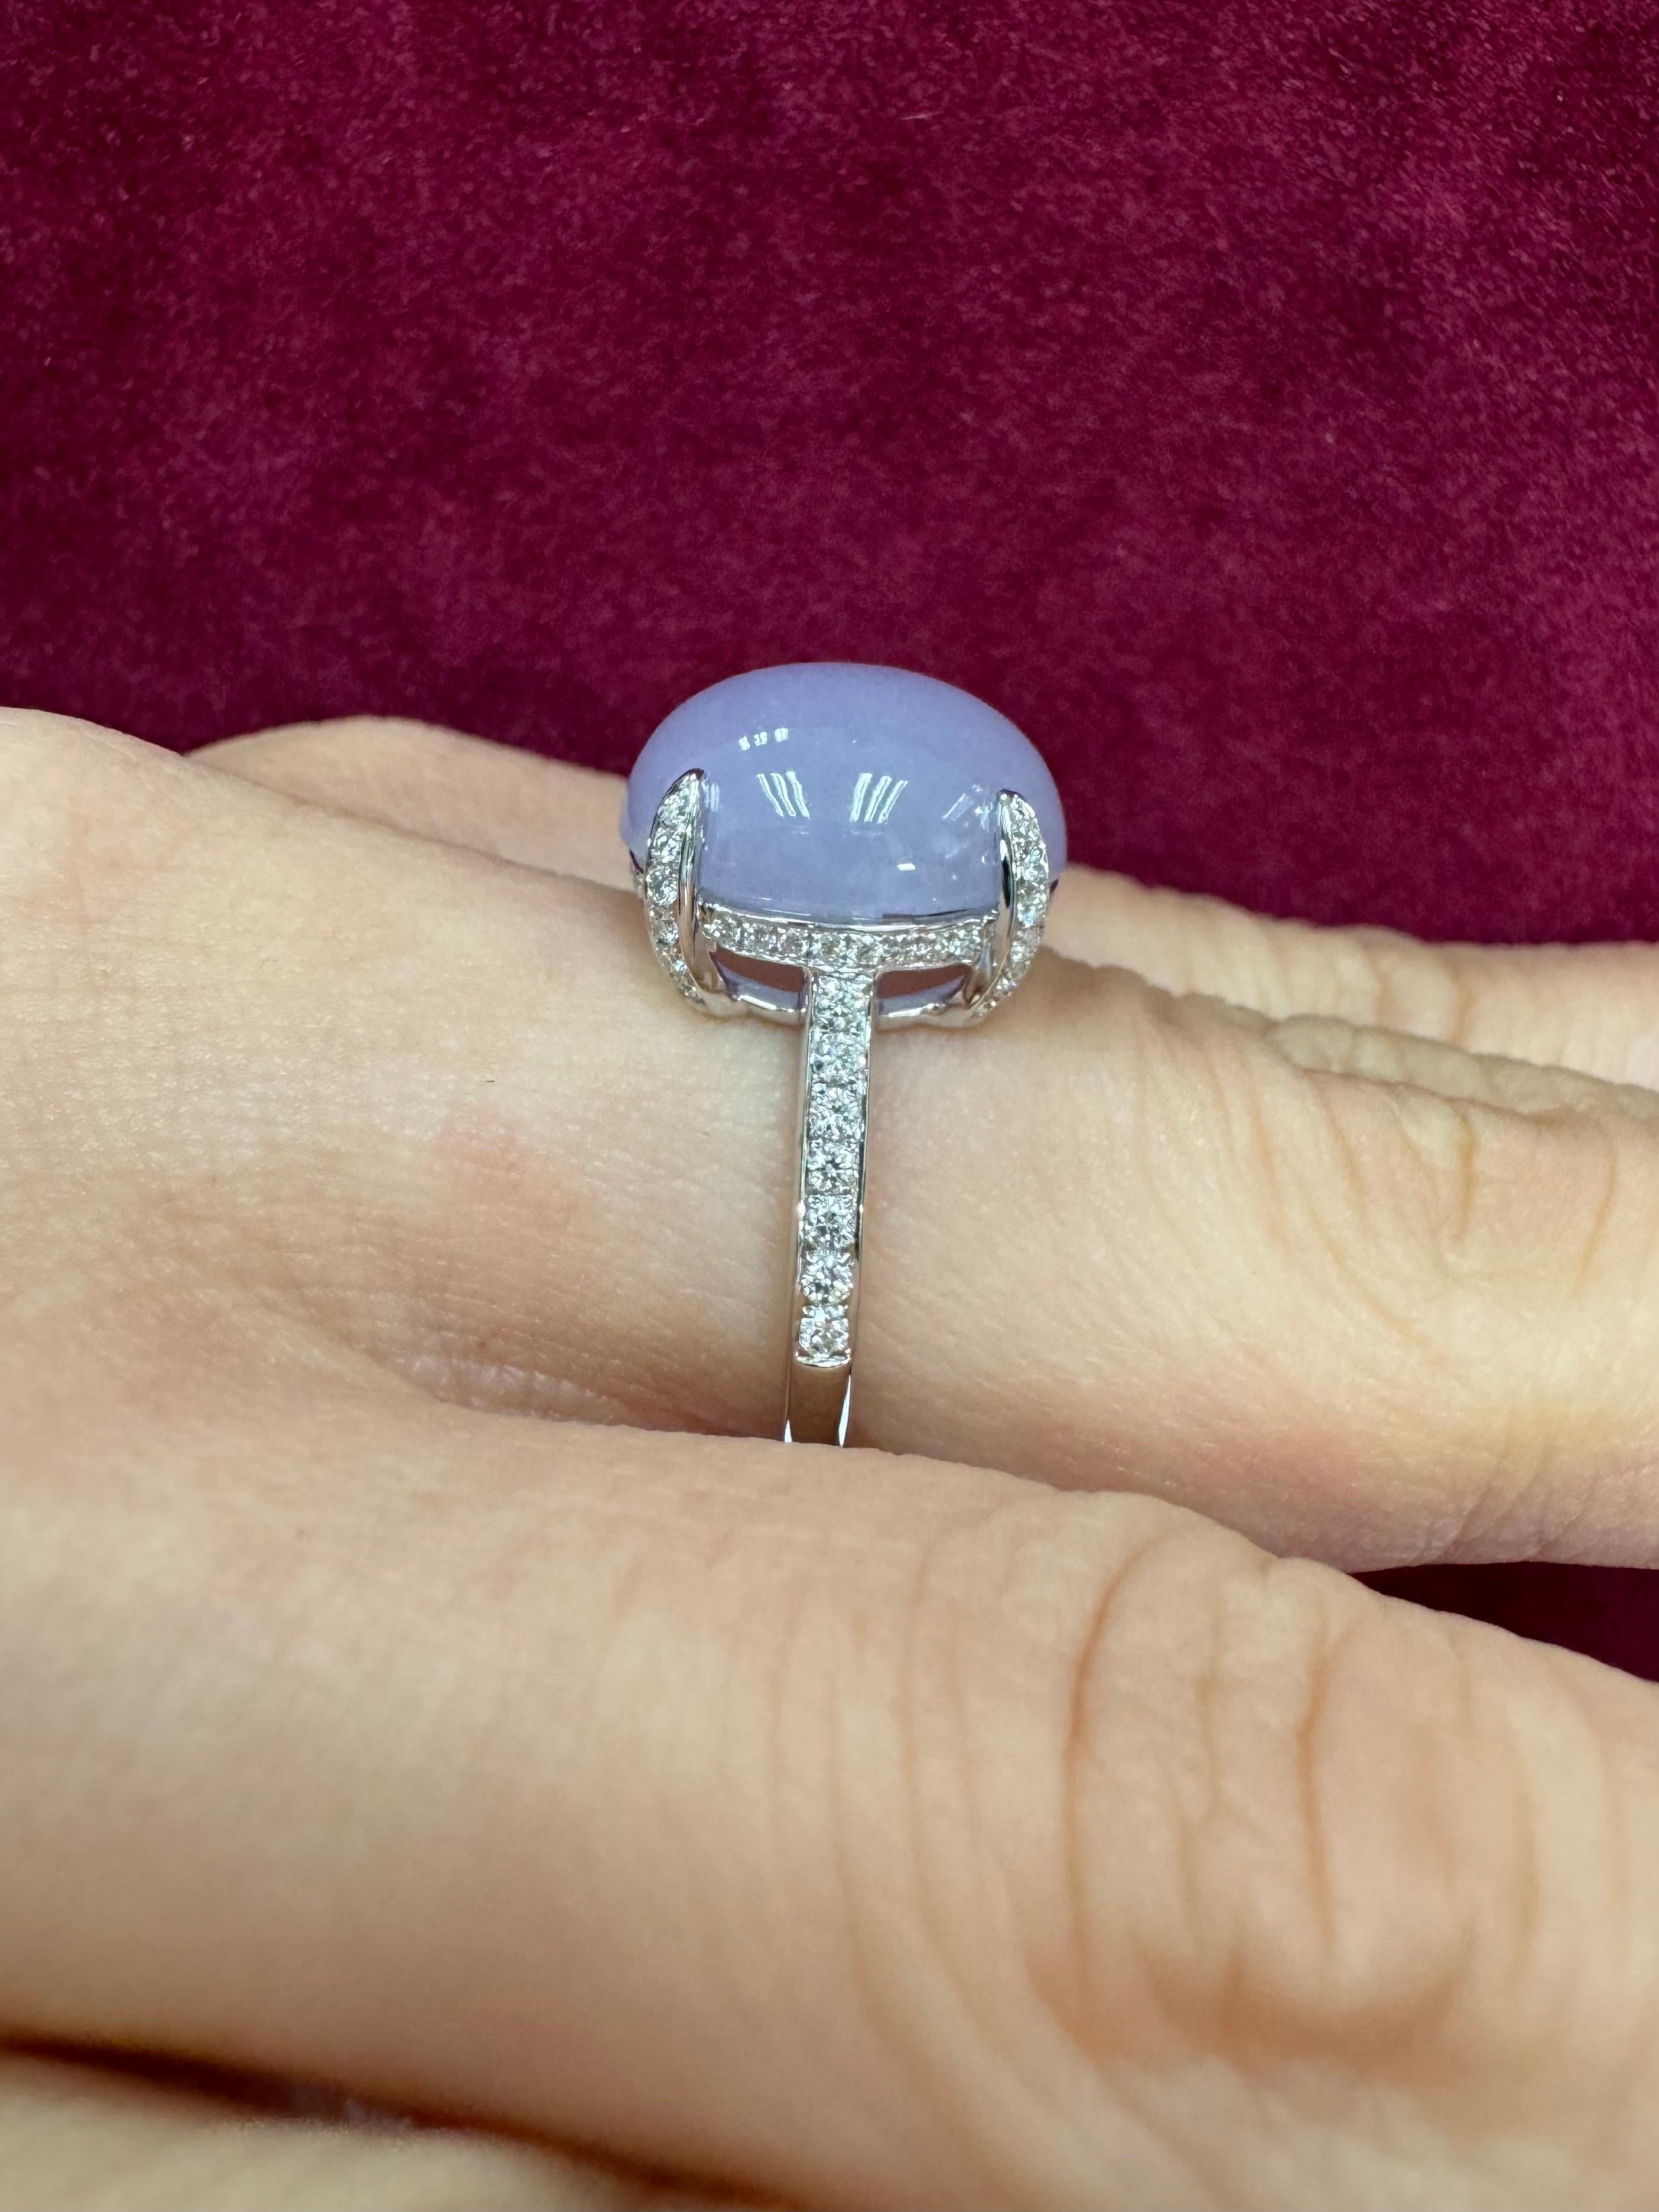 Contemporary Certified 11.36Cts Lavender Jade & Diamond Ring With Hidden halo. Substantial For Sale